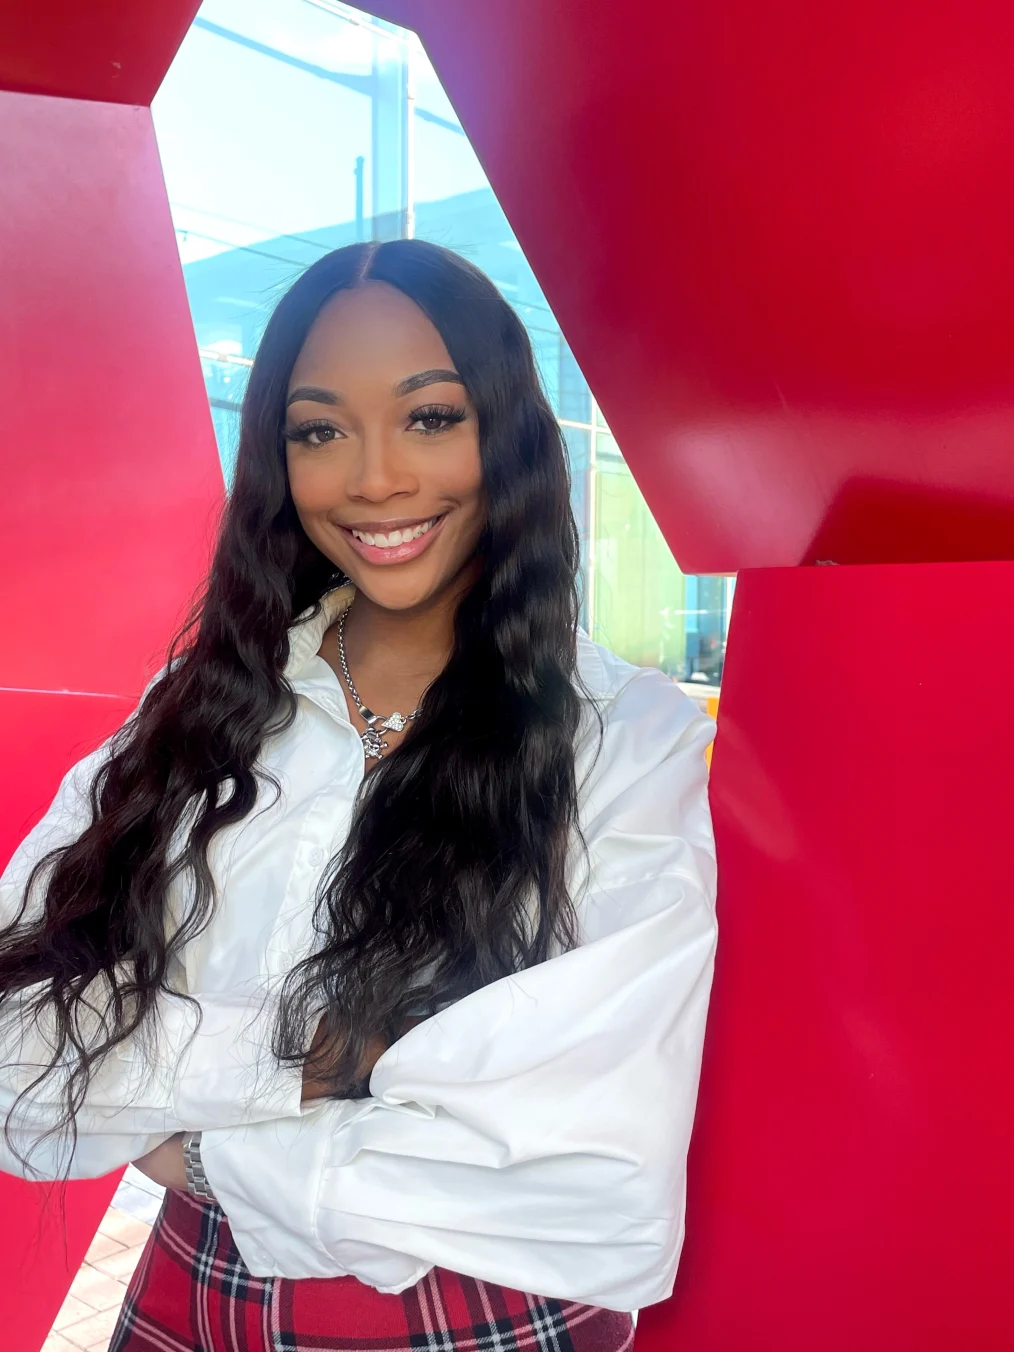 Raven Smith, a Black woman with a medium skin tone, smiles at the camera. She is wearing a long sleeved white shirt and red plaid pants. Her arms are crossed and she has long black hair.